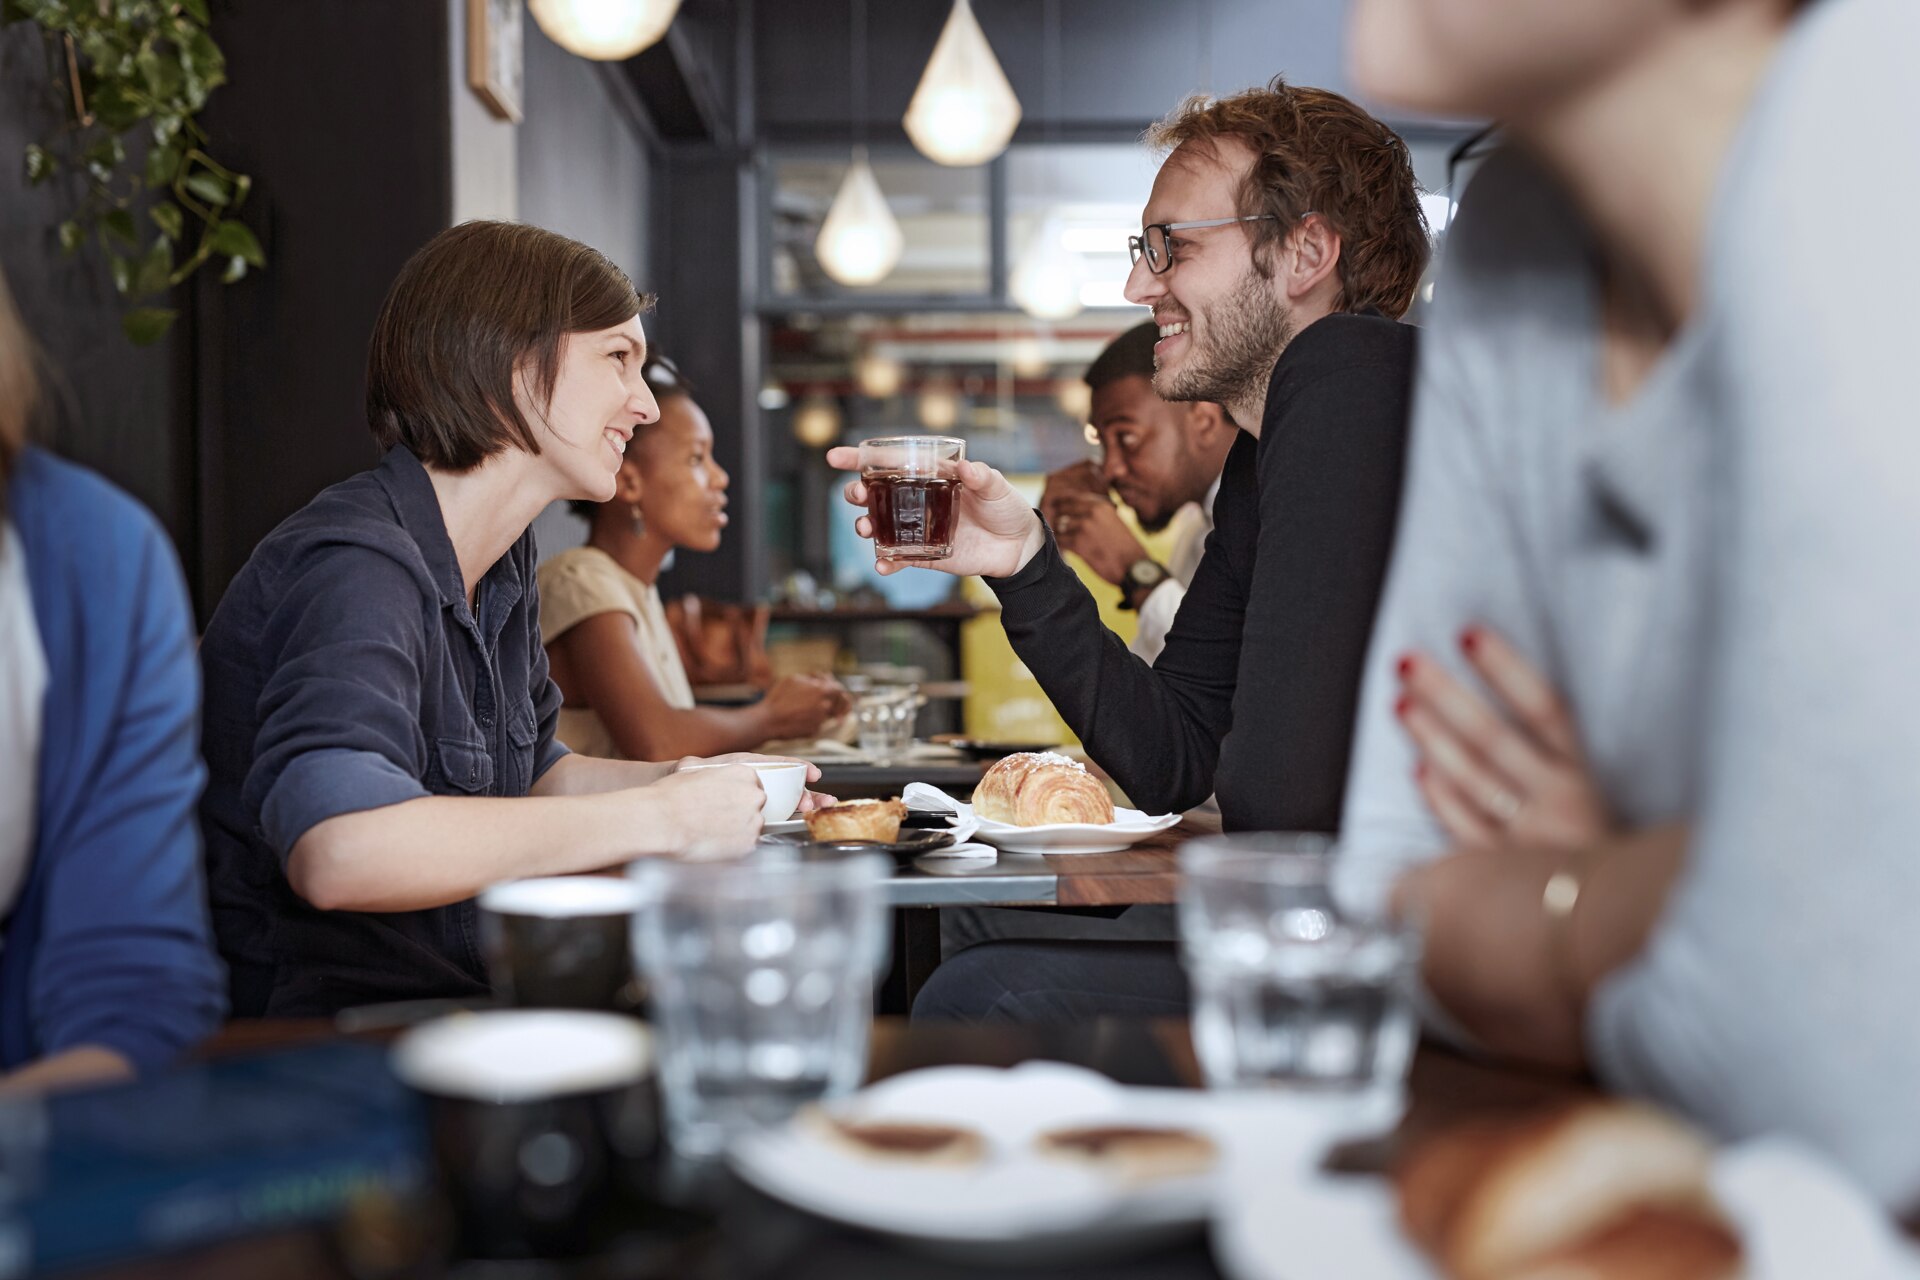 Female and male friends having a chat in a crowded bistro.